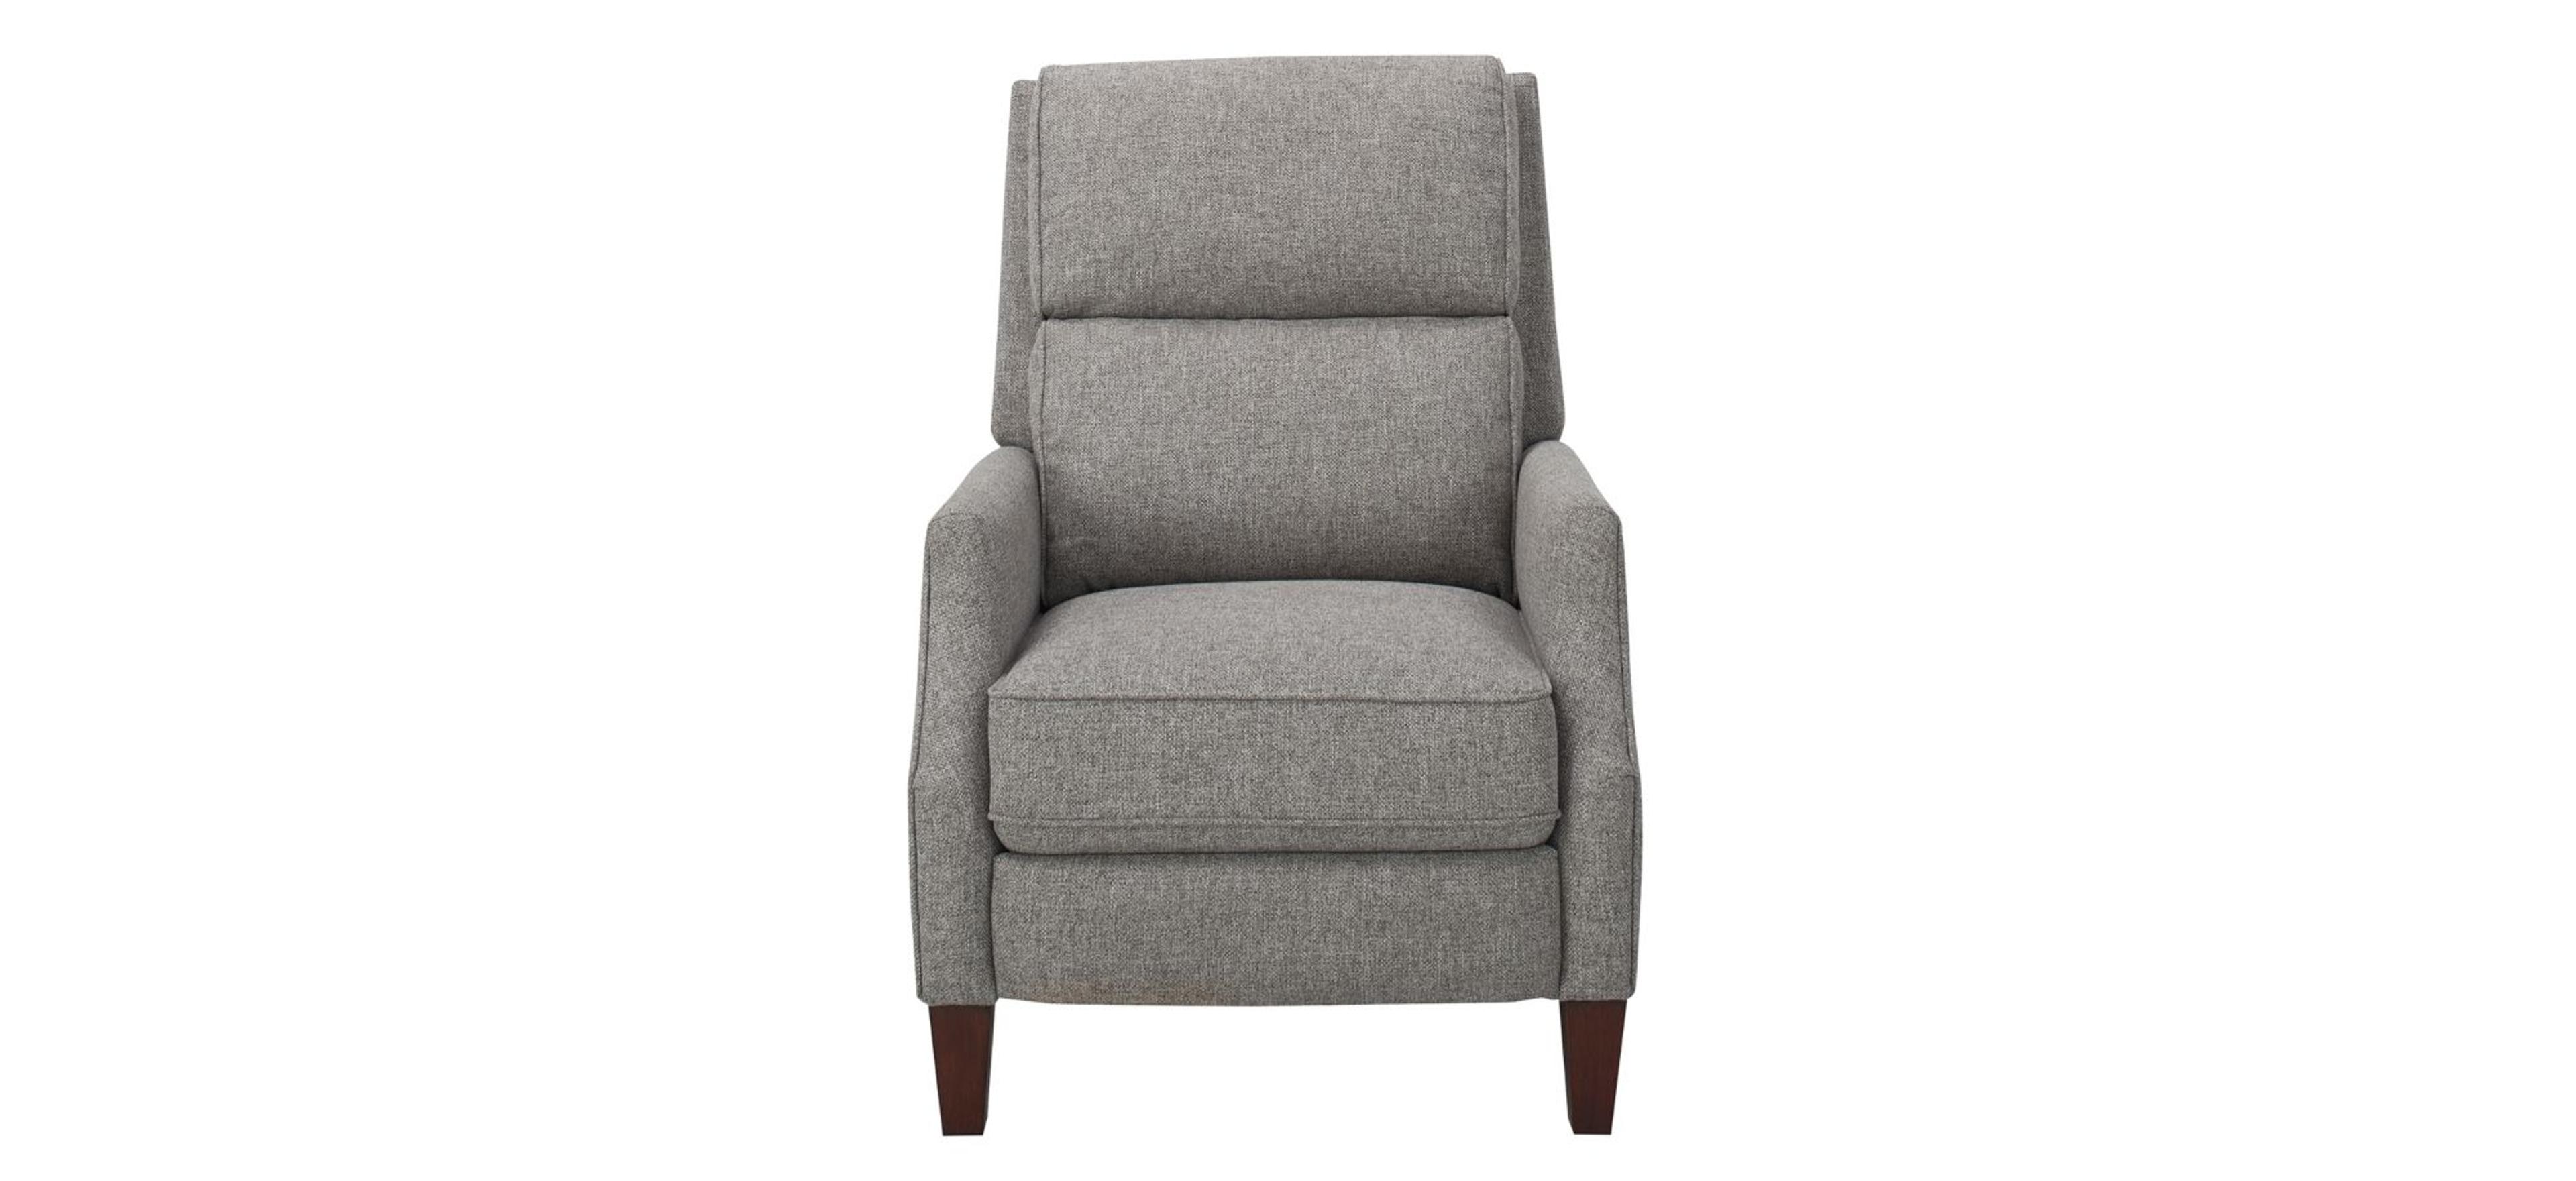 Tromley Pushback Recliner | Raymour & Flanigan